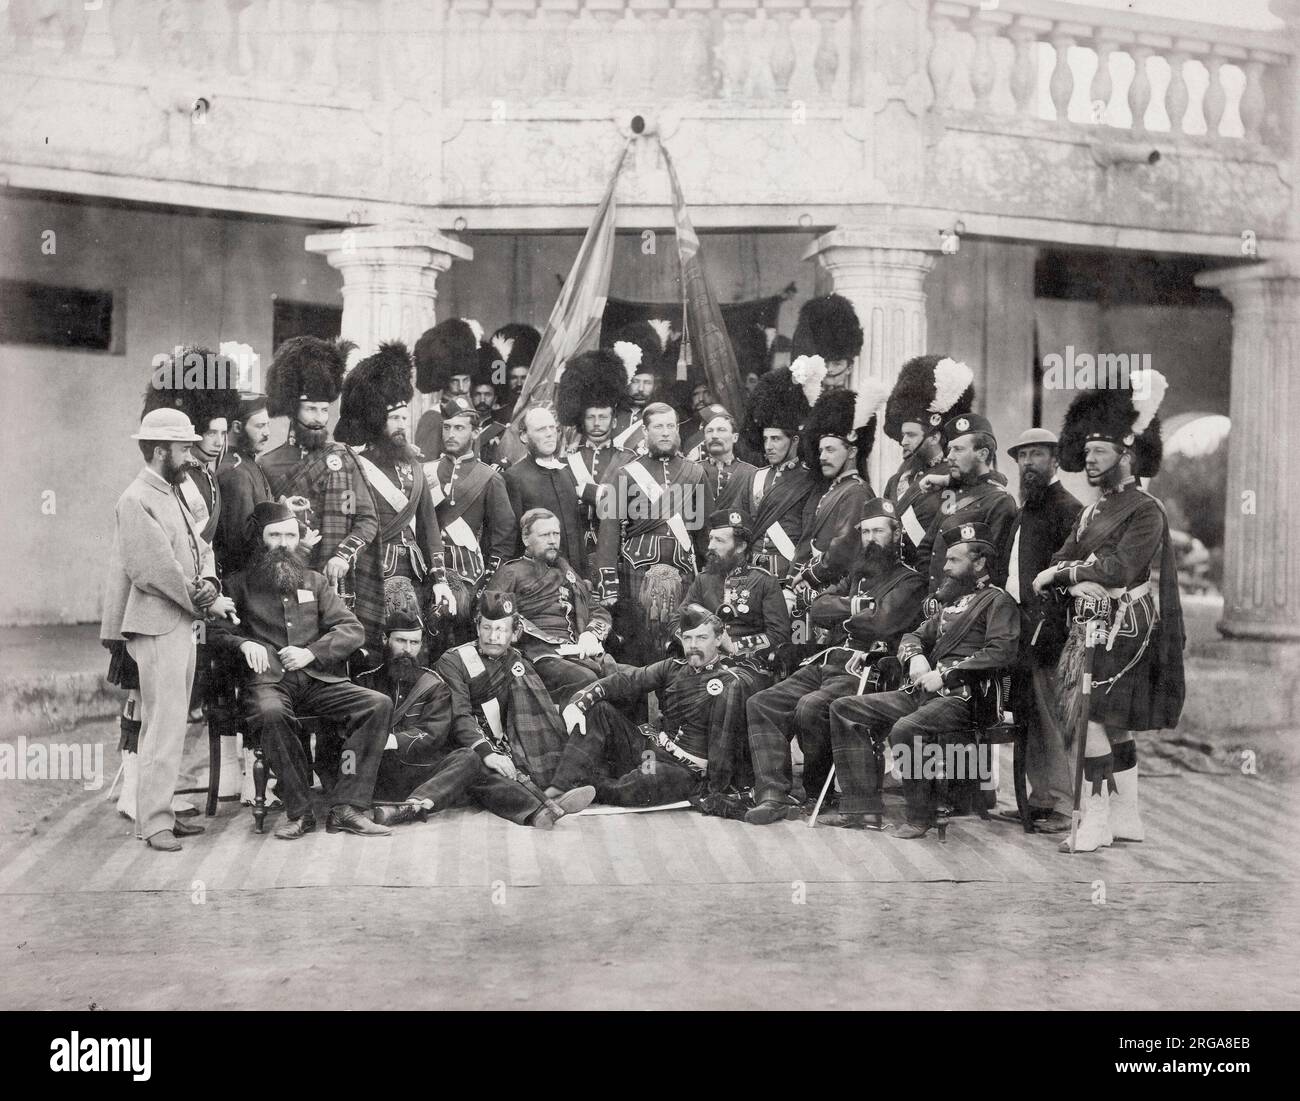 1860s' vintage photograph - British army in India - officers of the 79th Highlanders Stock Photo